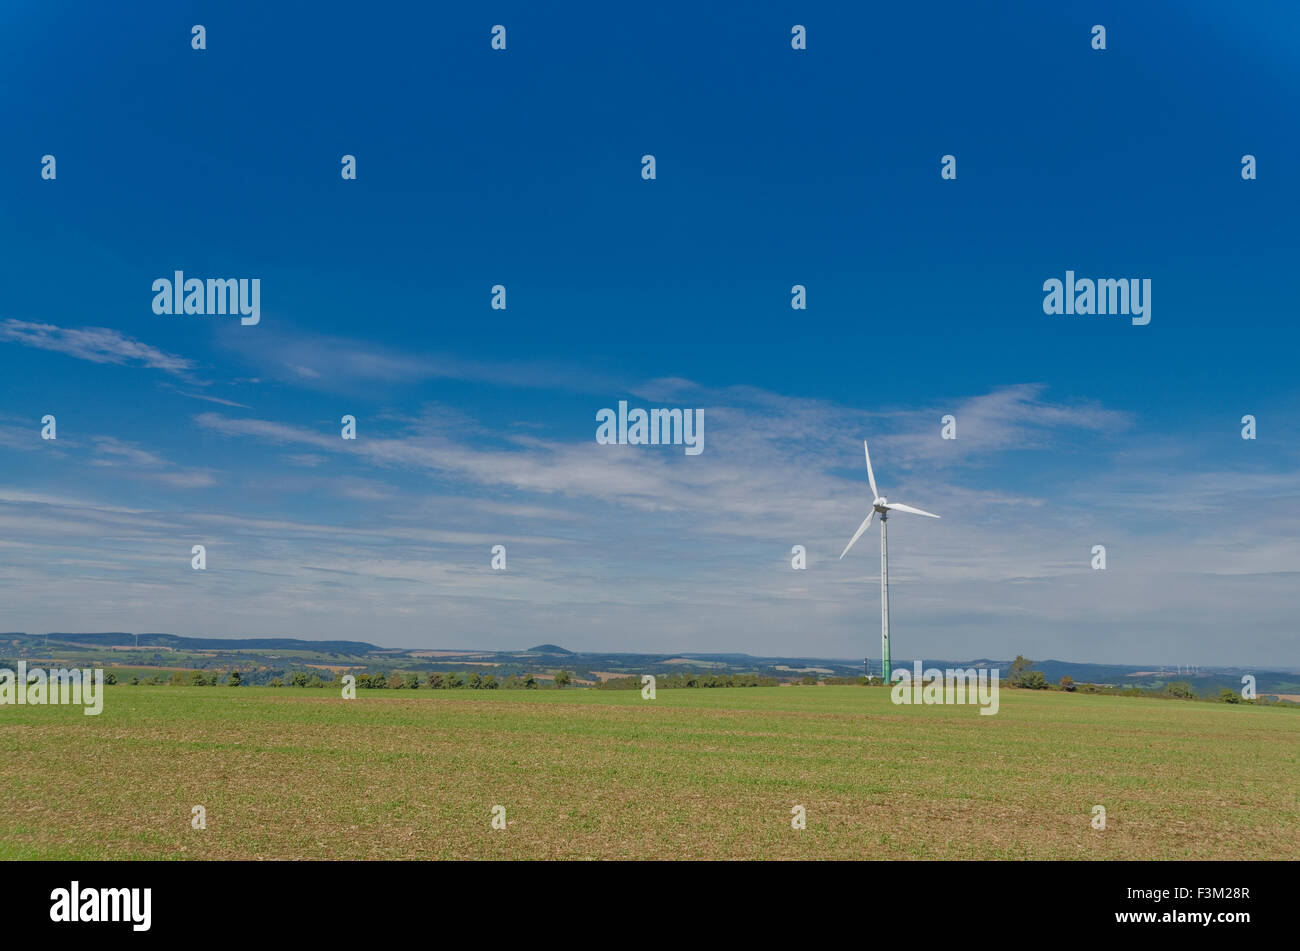 A wind power plant in agriculture landscape with blue sky Stock Photo